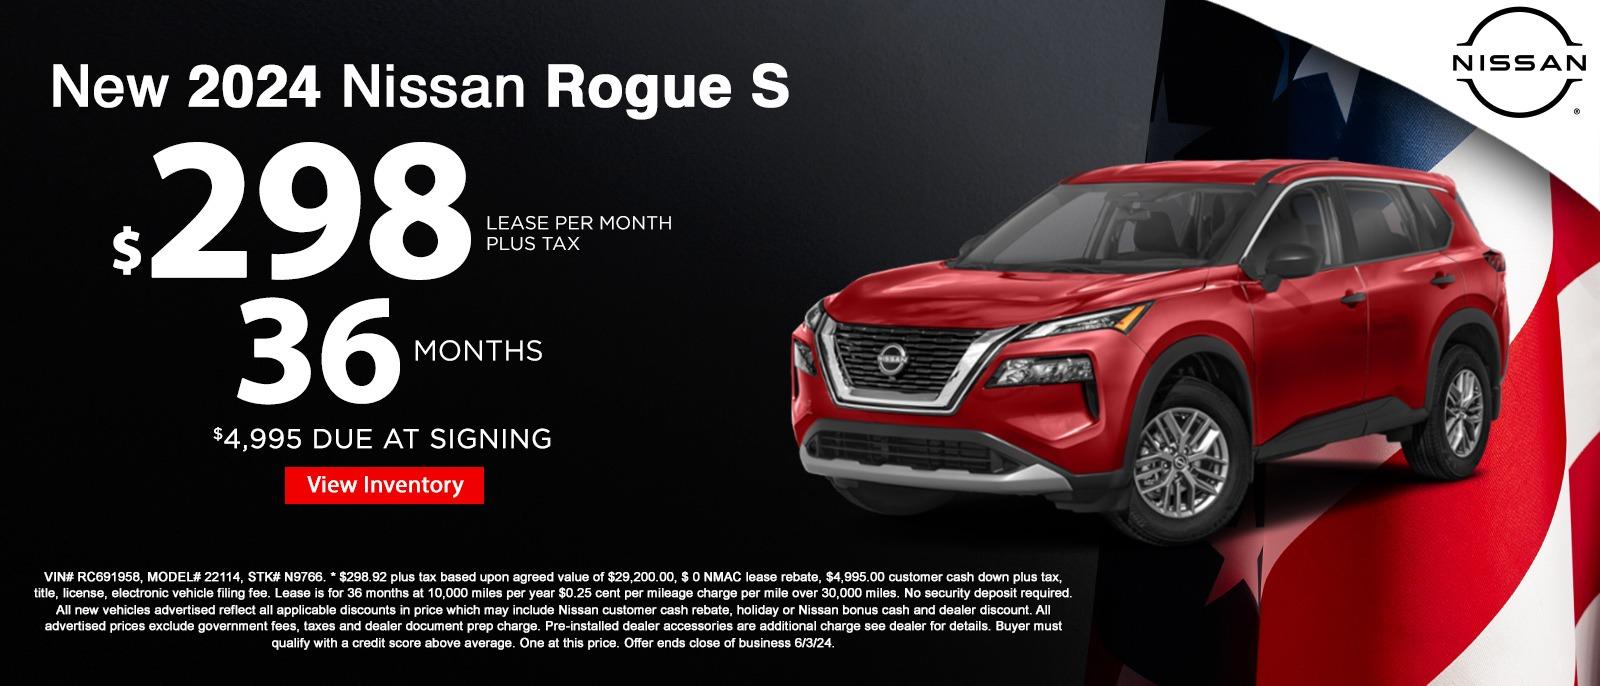 New 2024 Nissan Rogue S
$298 lease per month plus tax
36 months
$4,995 due at signing